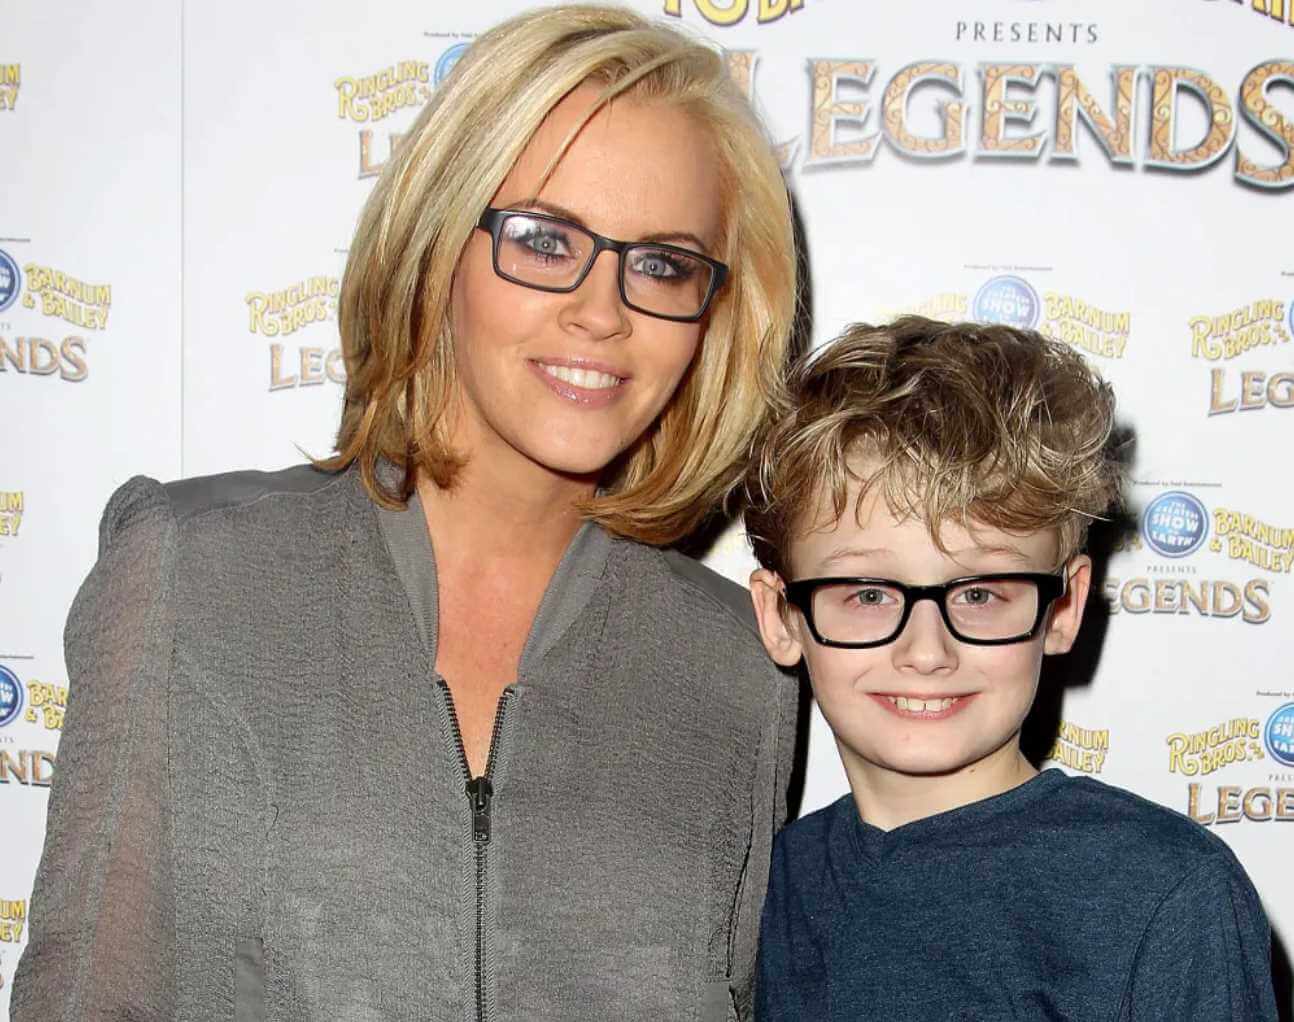 Jenny McCarthy with her son Photo